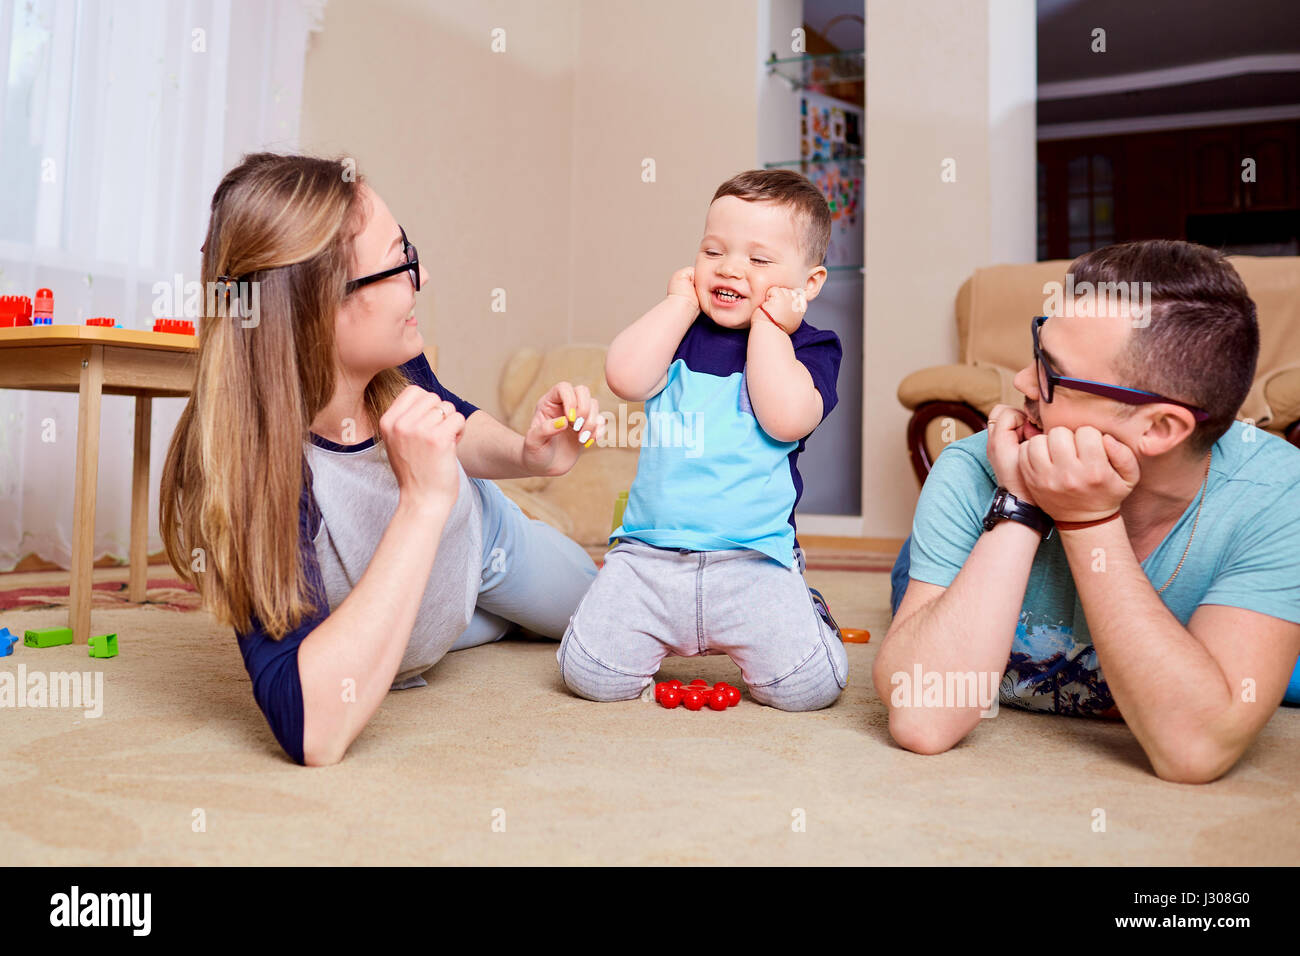 Happy family having fun playing on the floor in room Stock Photo